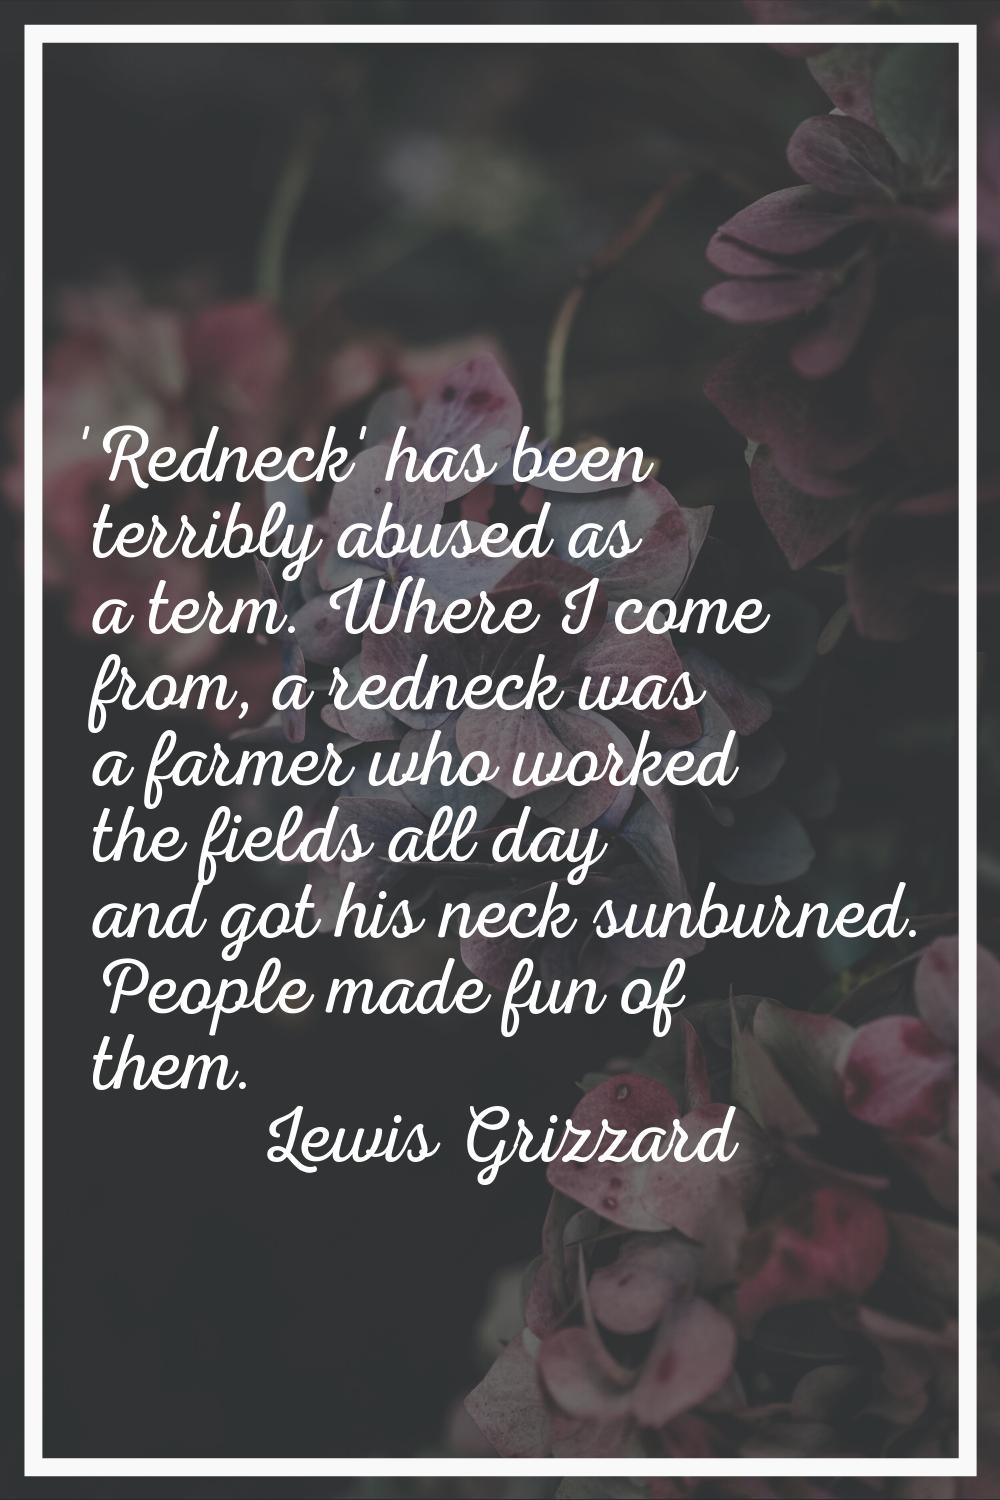 'Redneck' has been terribly abused as a term. Where I come from, a redneck was a farmer who worked 